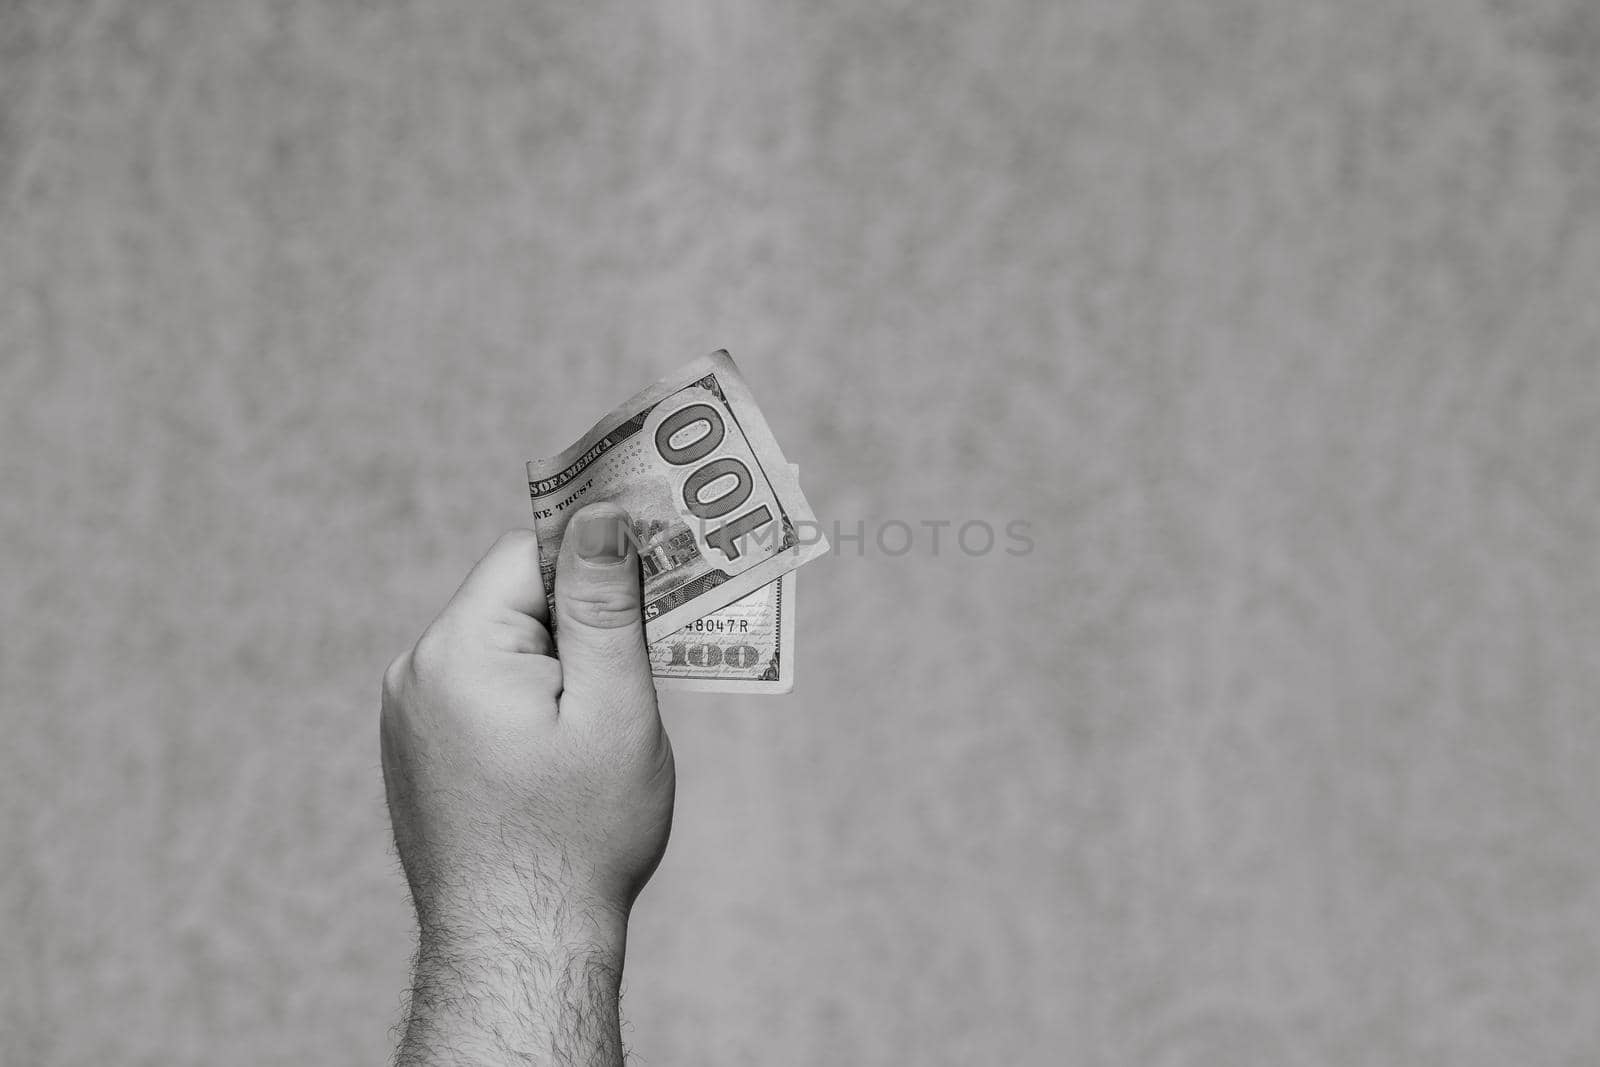 Hand holding showing dollars money and giving or receiving money like tips, salary. 100 USD banknotes, American Dollars currency isolated with copy space.